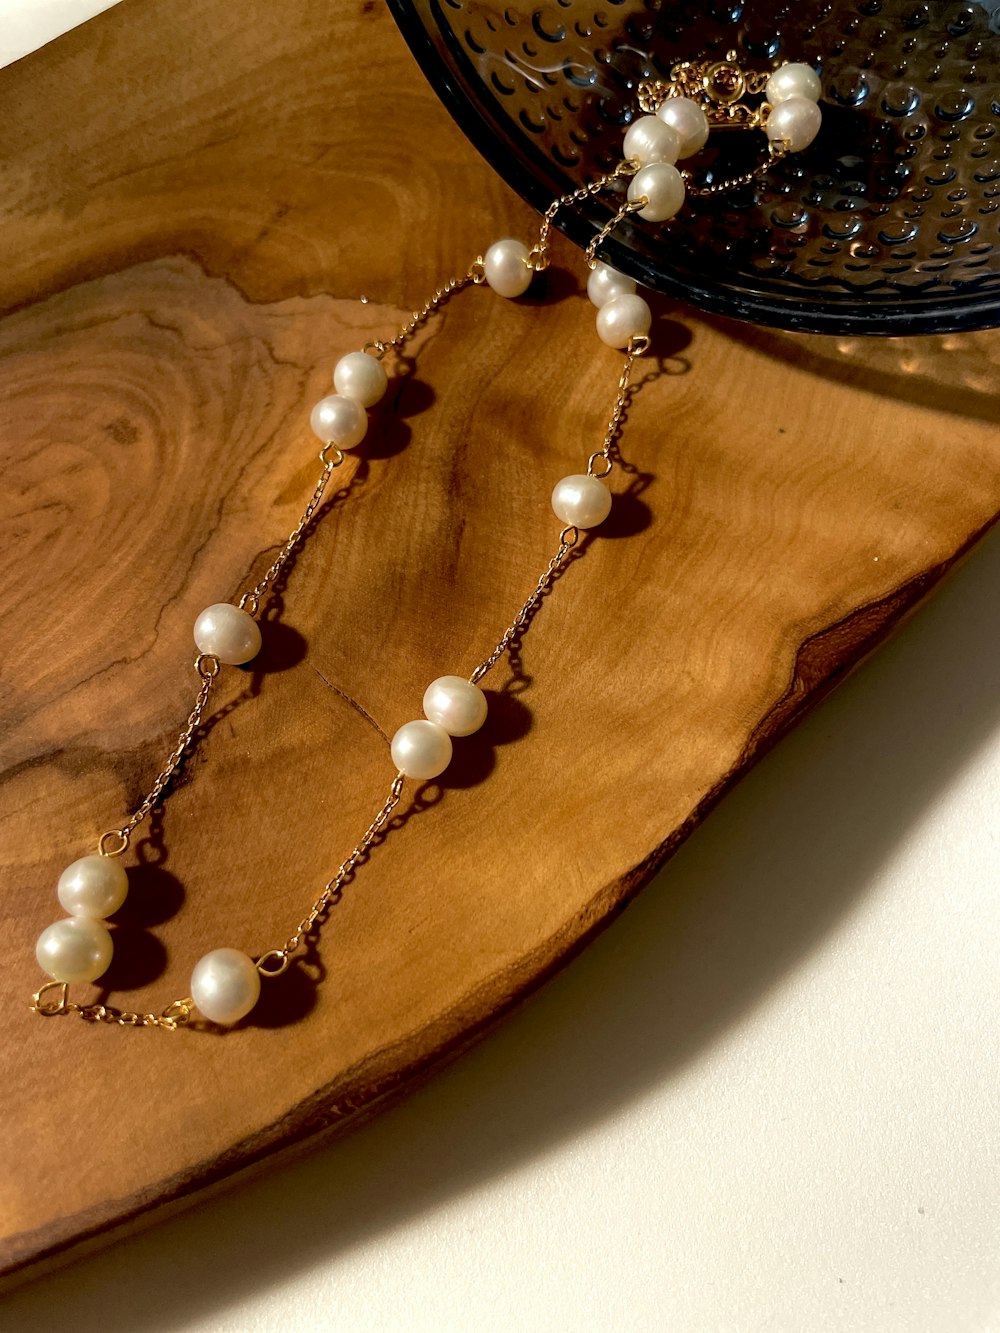 a close up of a necklace on a wooden plate